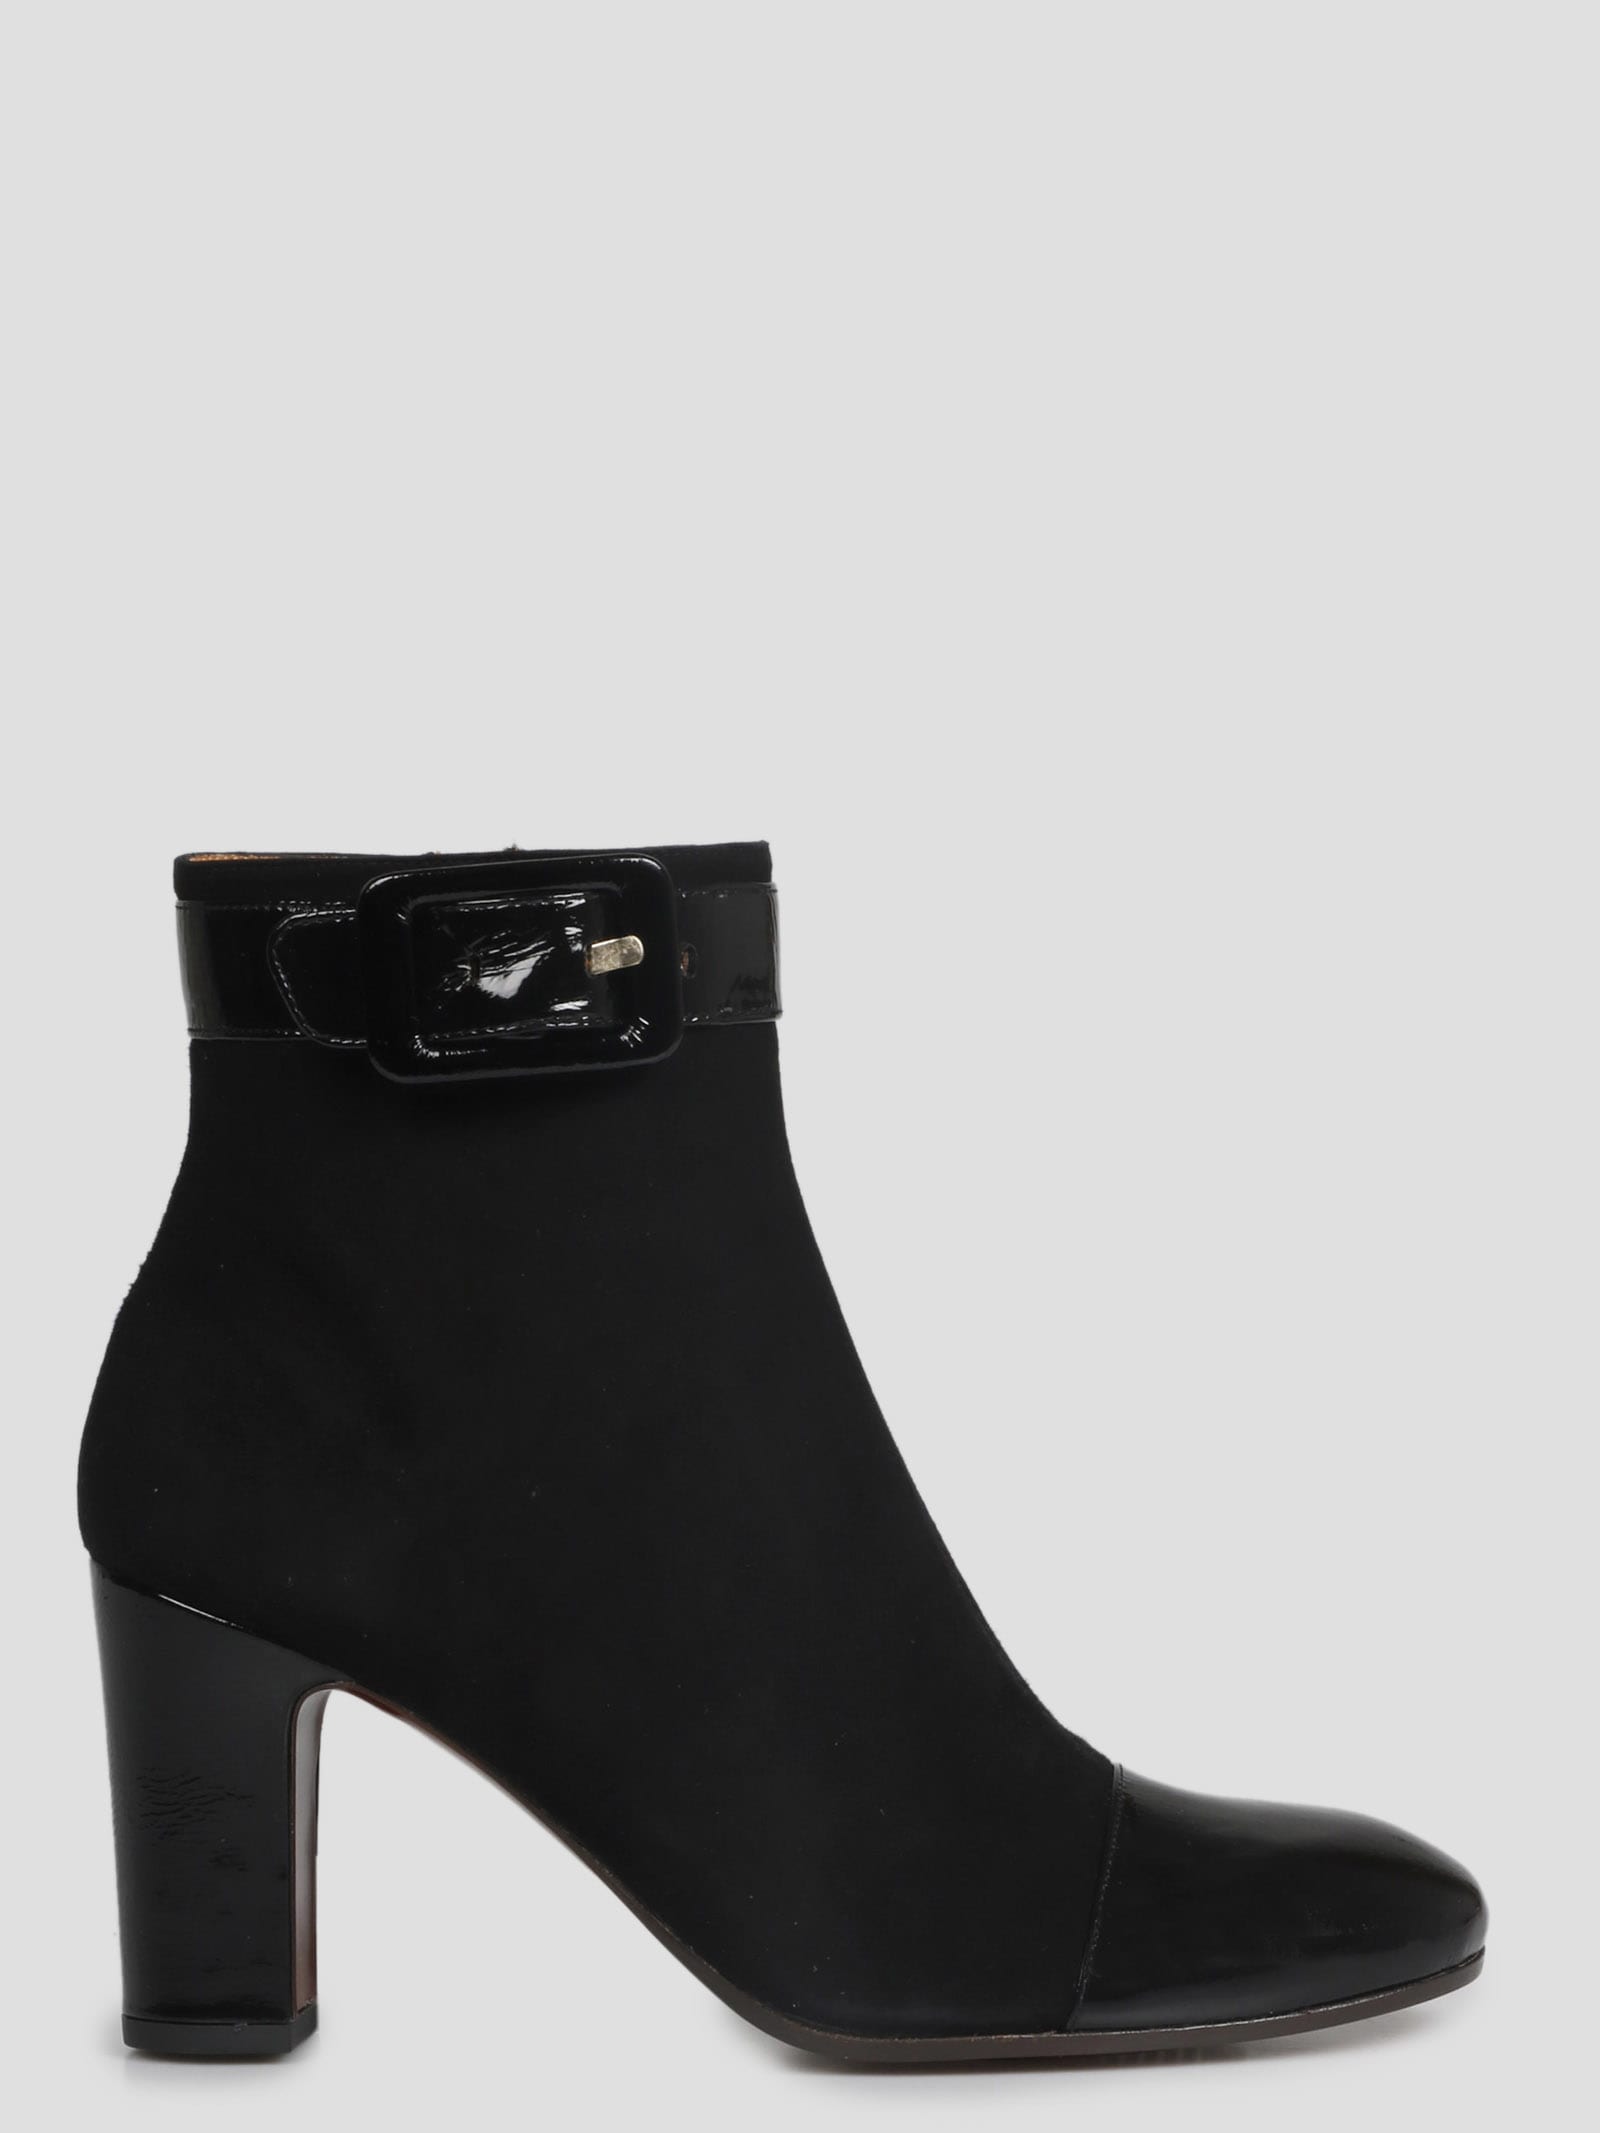 Chie Mihara Wacos Ankle Boots